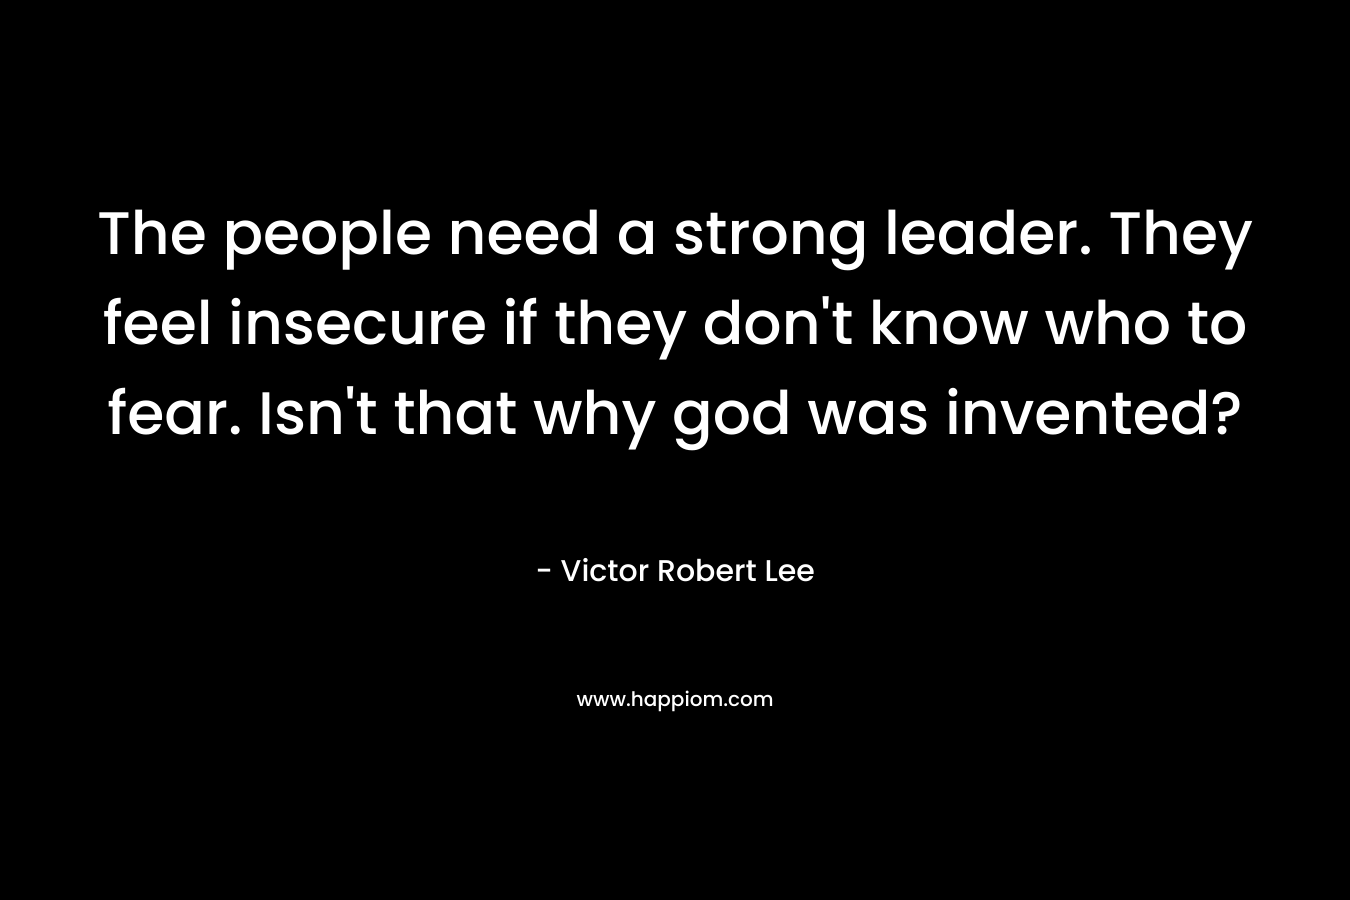 The people need a strong leader. They feel insecure if they don’t know who to fear. Isn’t that why god was invented? – Victor Robert Lee